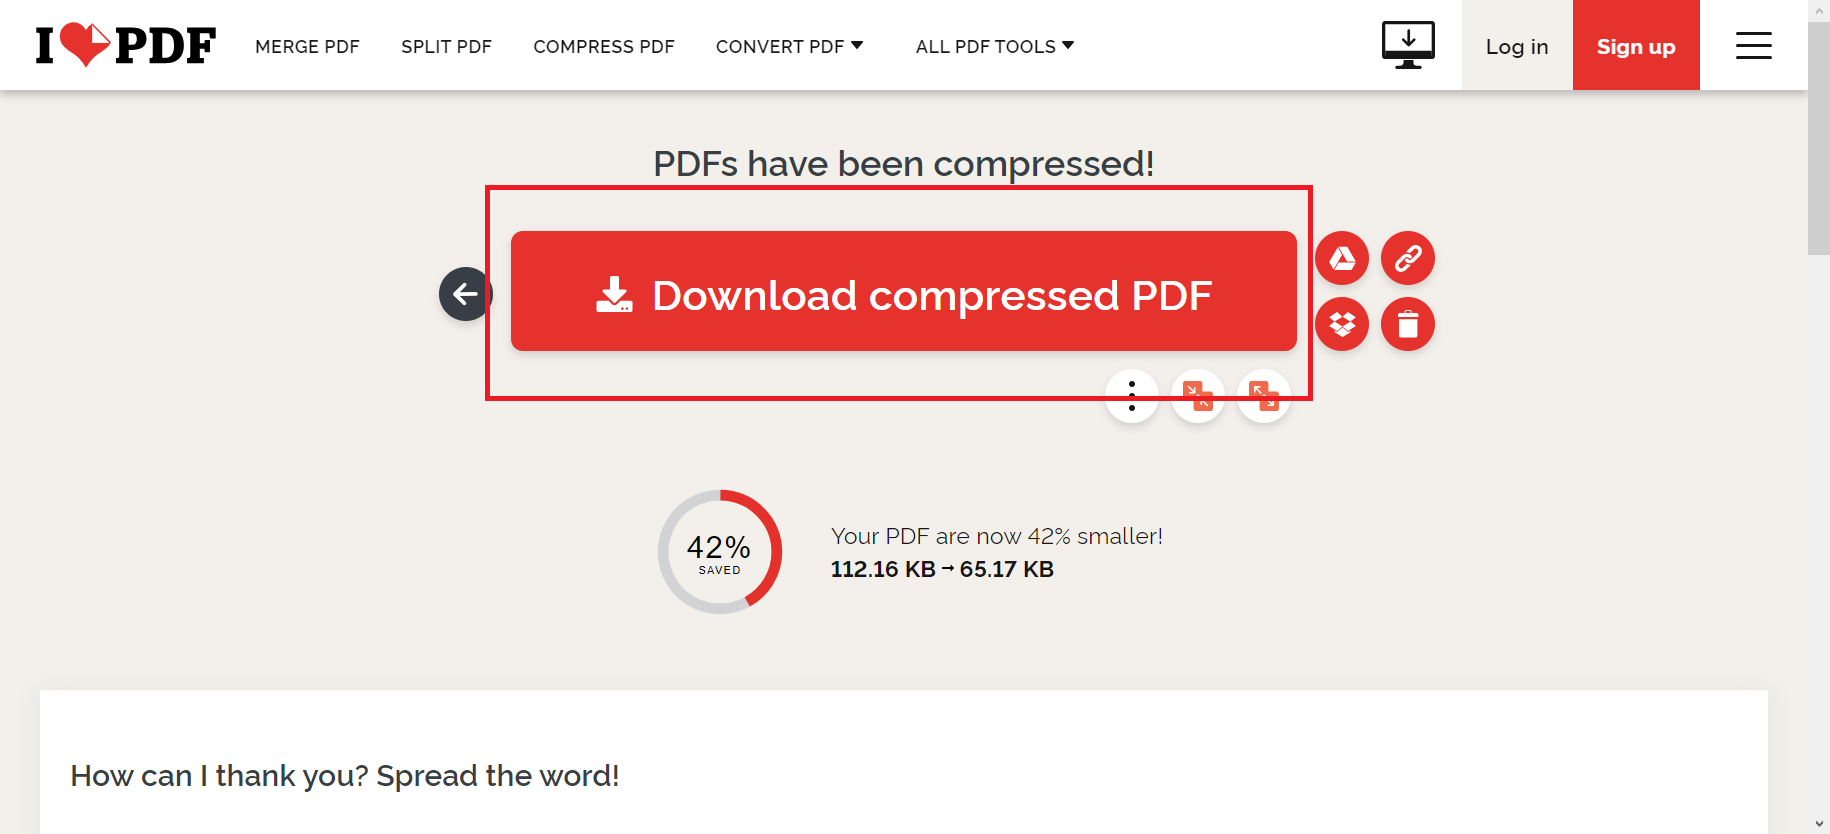 You can download the smaller PDF to your device when it's finished